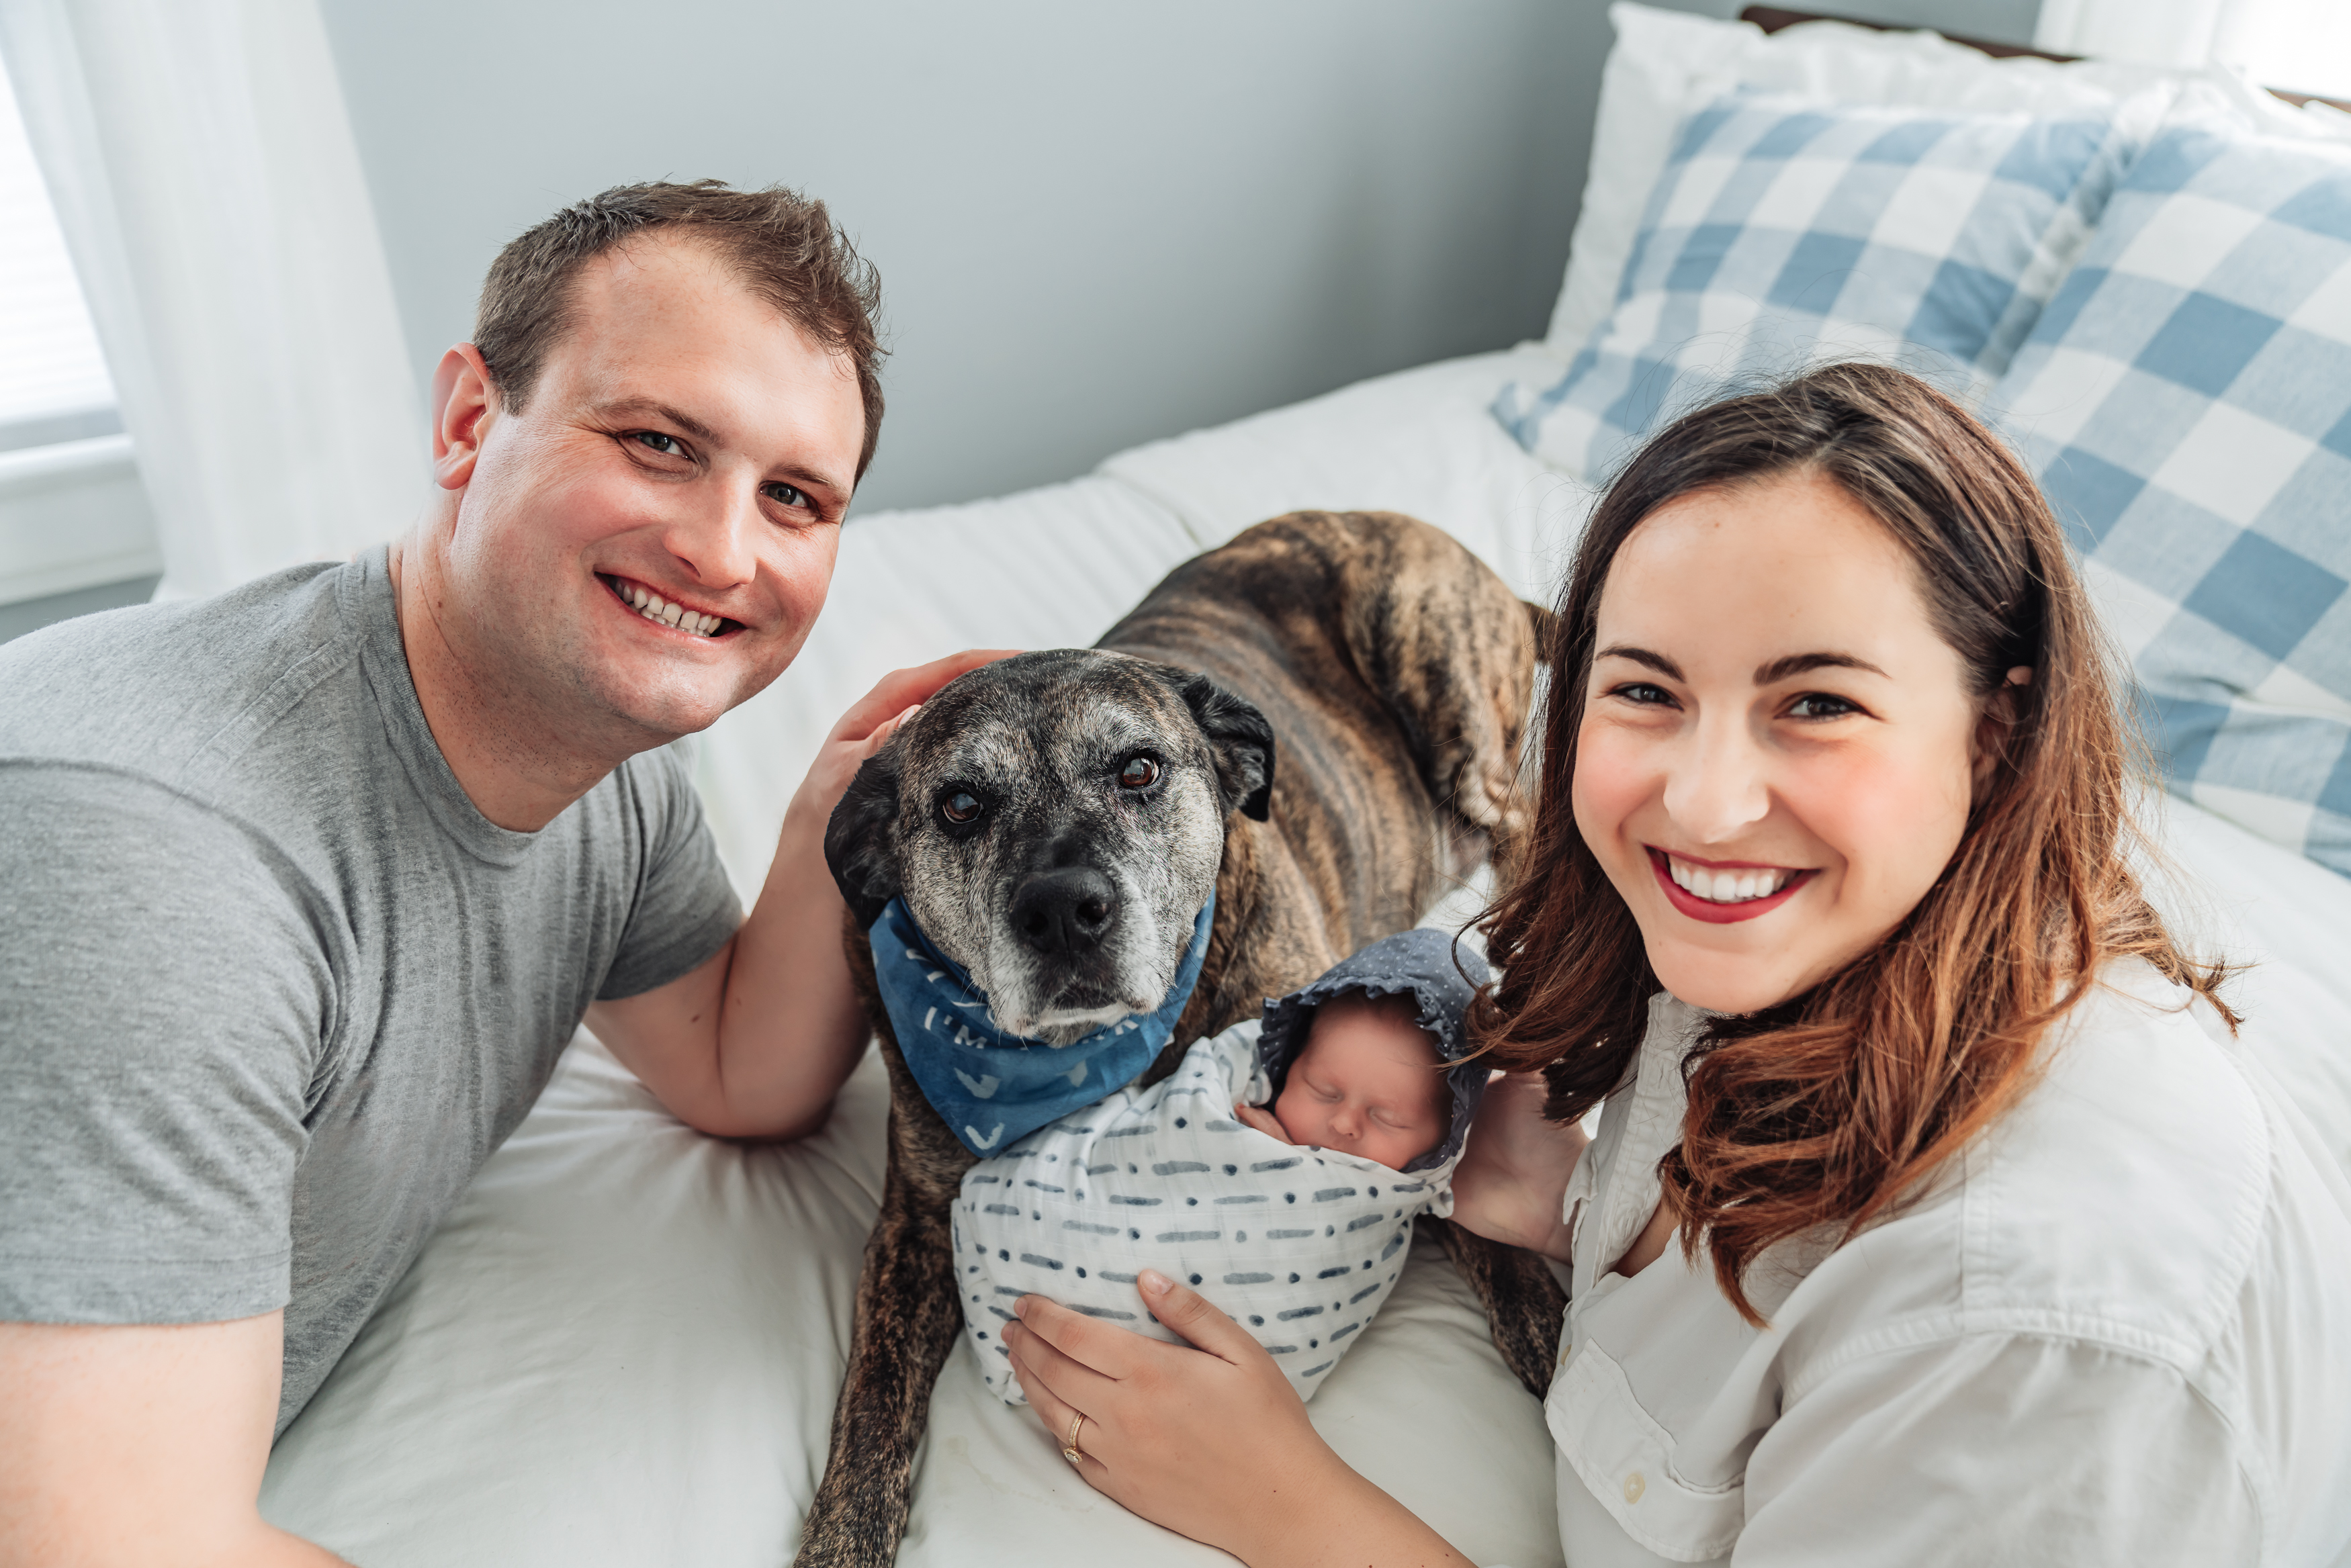 Family Portrait of a Mom, Dad, newborn baby and their dog.